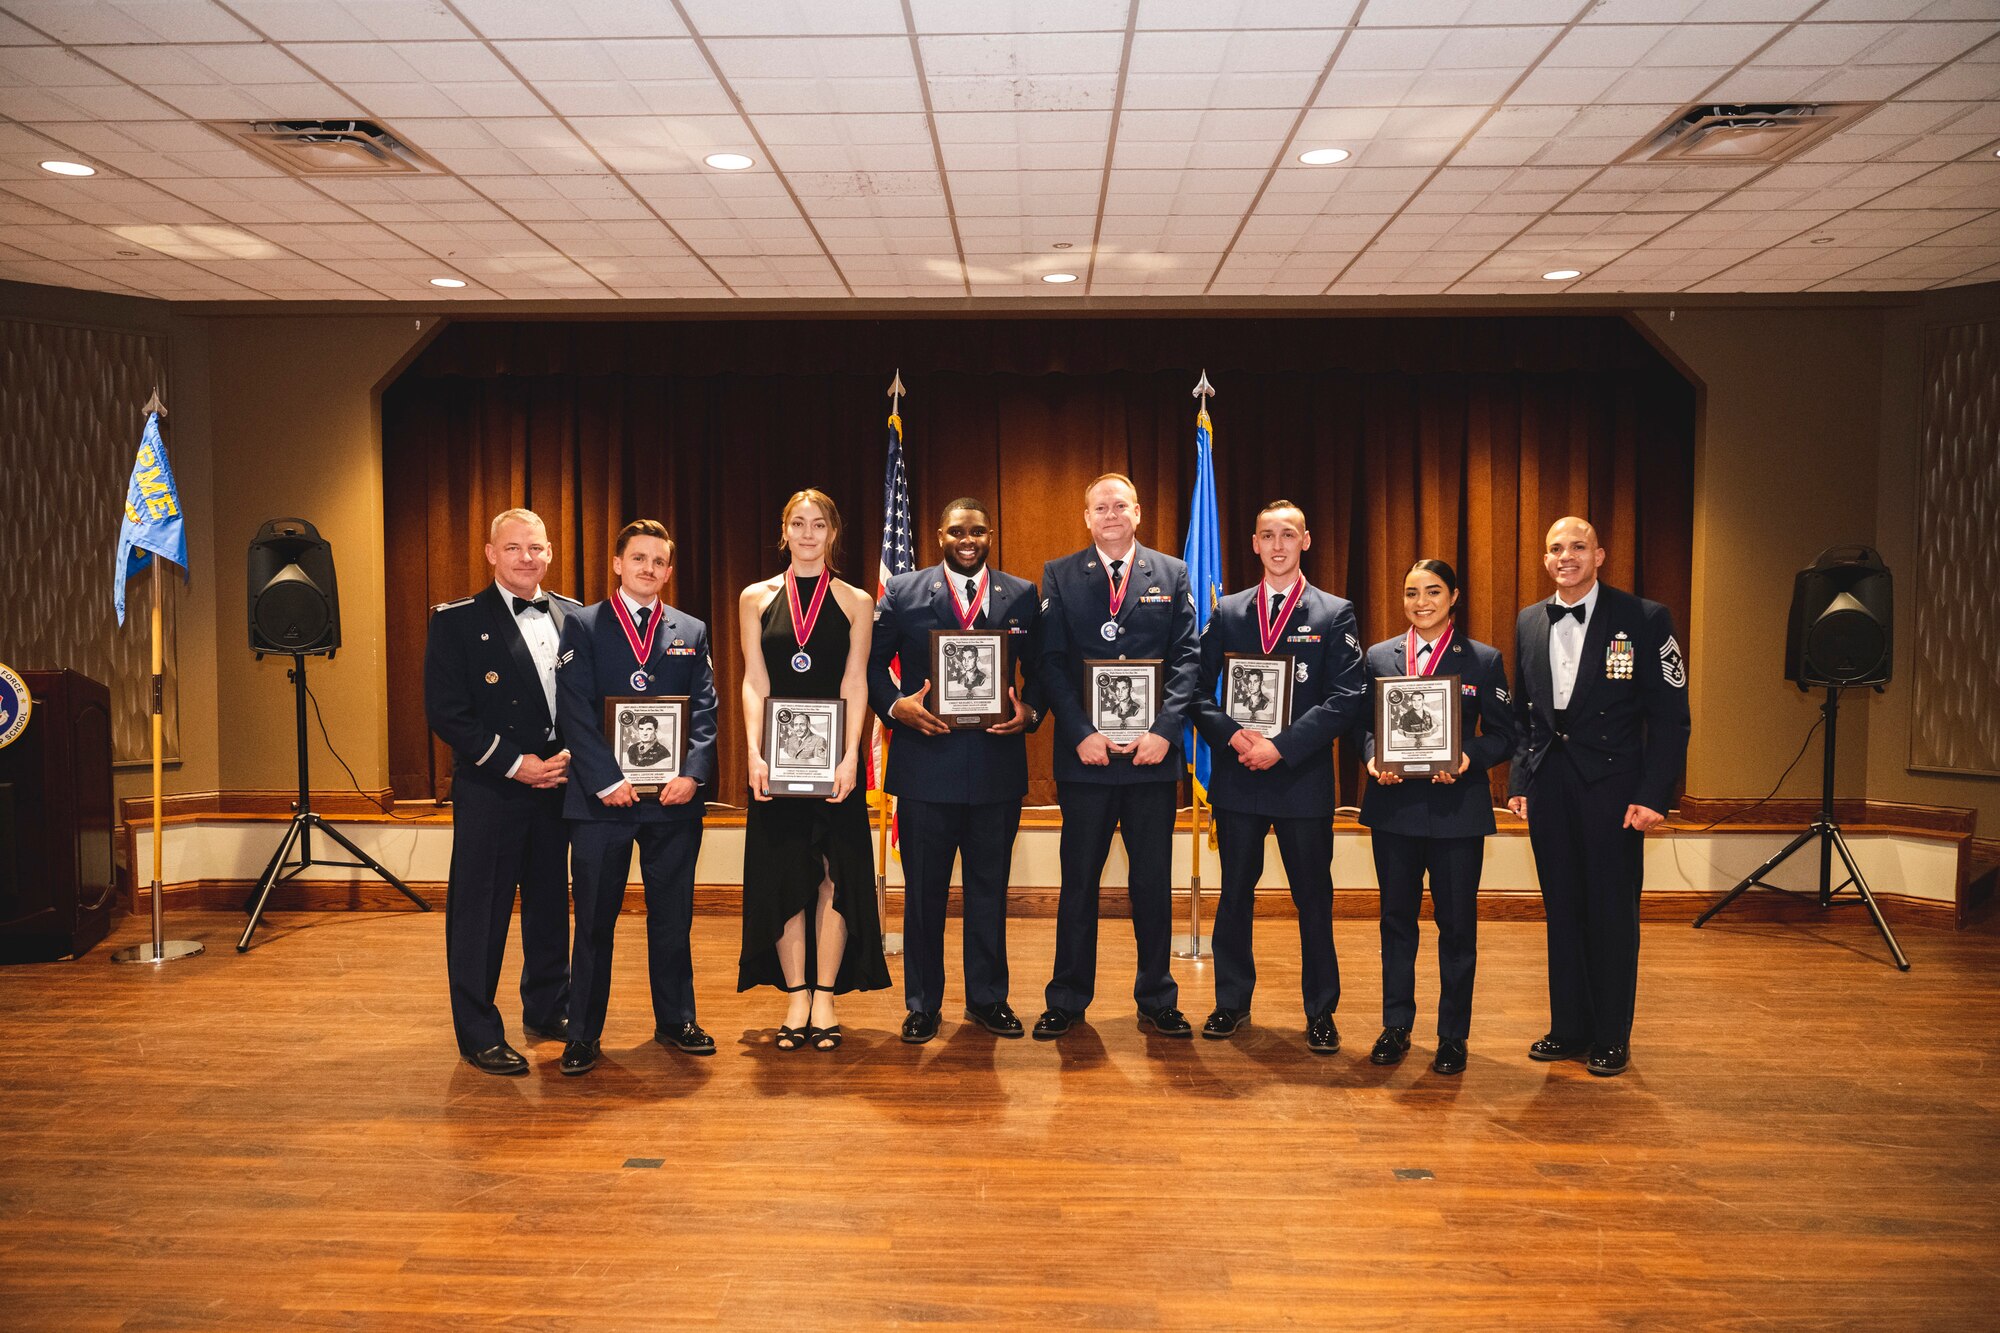 Col. Christopher Meeker, 88th Air Base Wing and installation commander, and Chief Master Sgt. Llyod Morales, 88th Air Base Wing command chief, stand with the honor graduates of Airman Leadership School class 23-B Feb. 9 at the Wright-Patt Club at Wright-Patterson Air Force Base, Ohio.